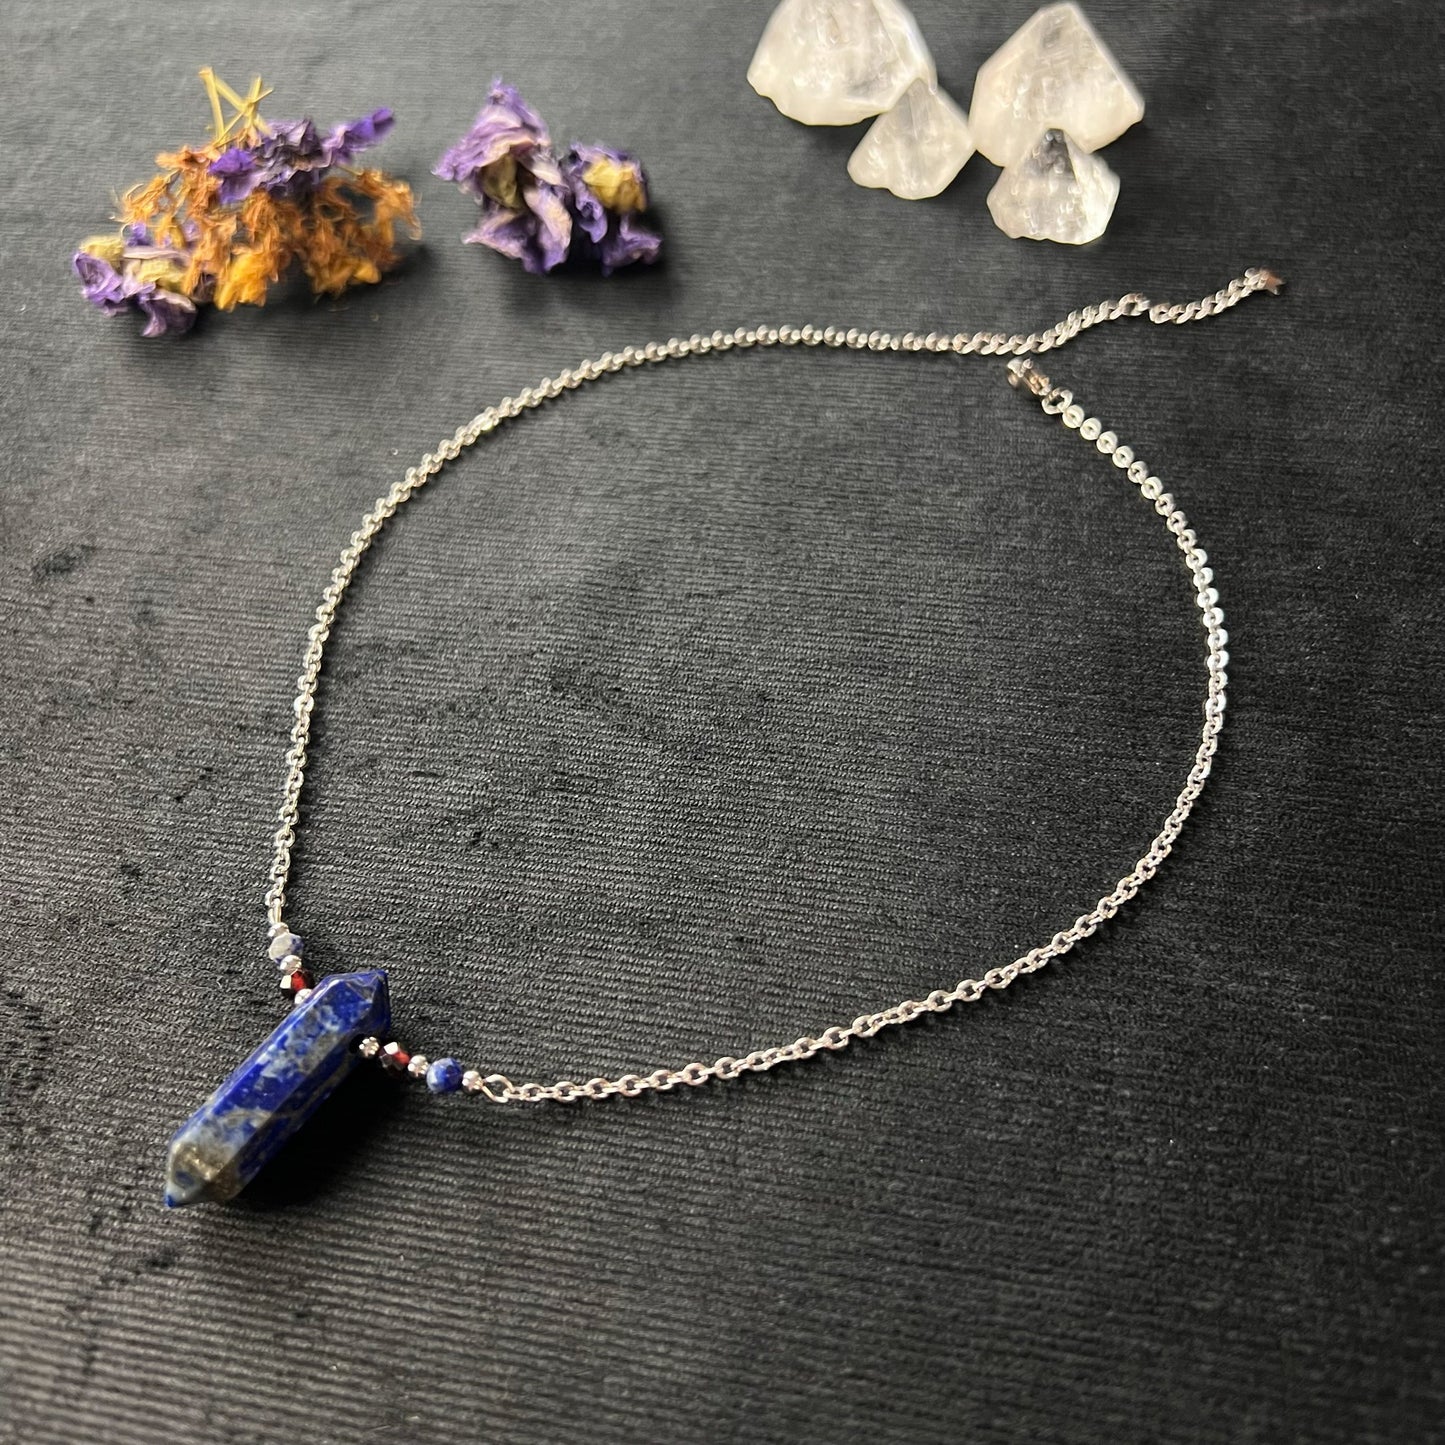 Lapis lazuli, garnet and stainless steel necklace with faceted beads - The French Witch shop